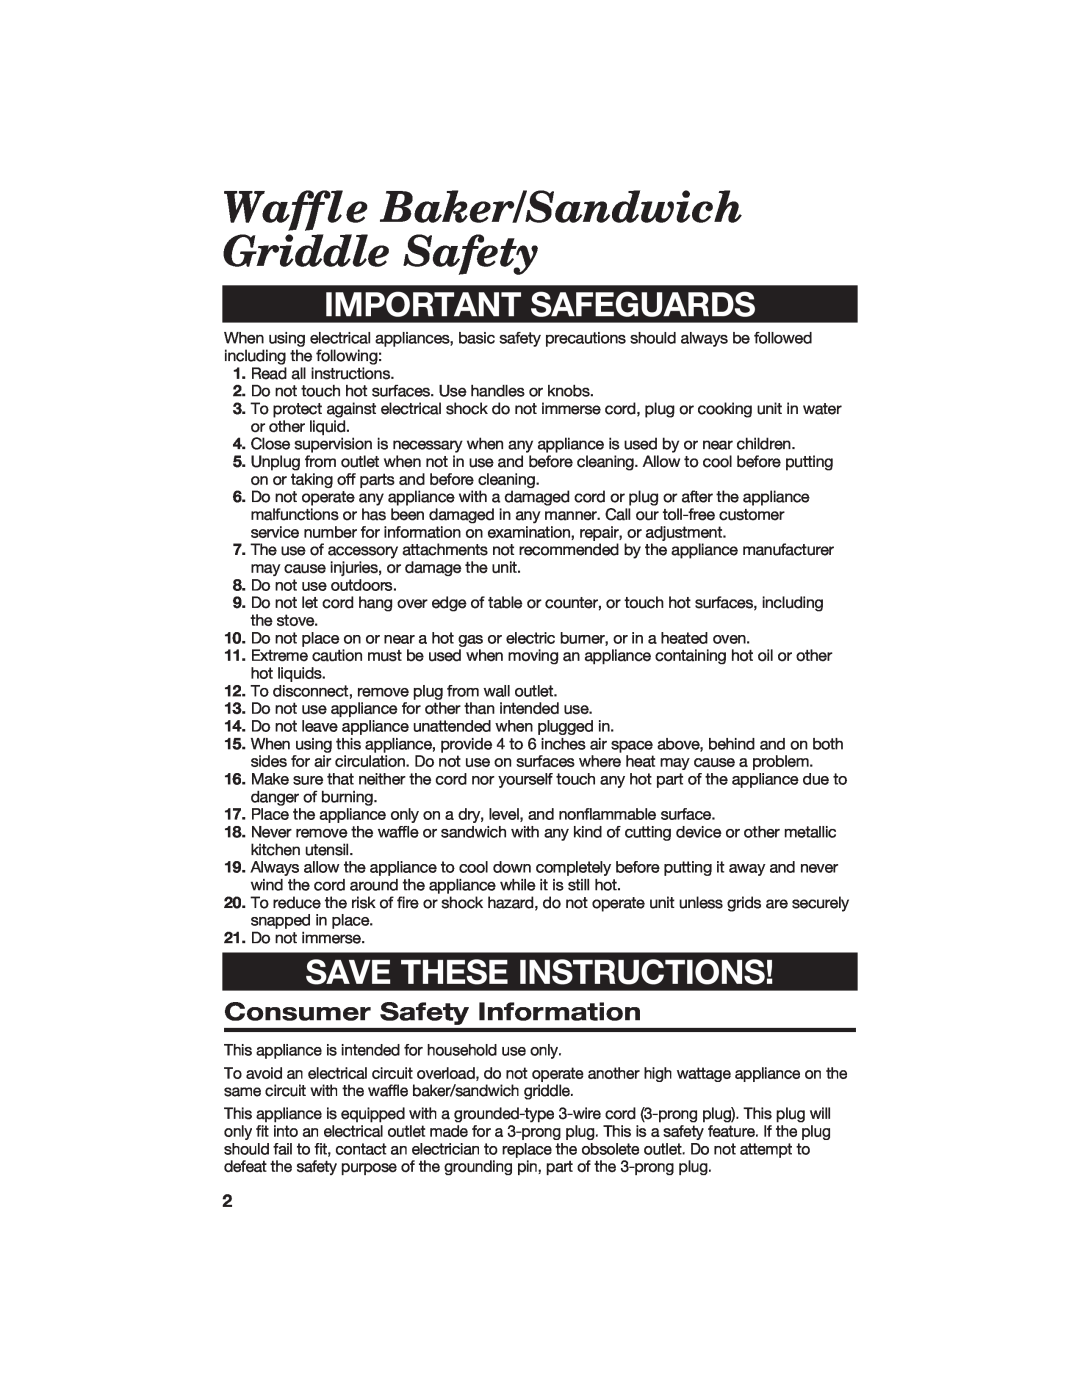 Hamilton Beach 840055700 manual Waffle Baker/Sandwich Griddle Safety, Consumer Safety Information, Important Safeguards 